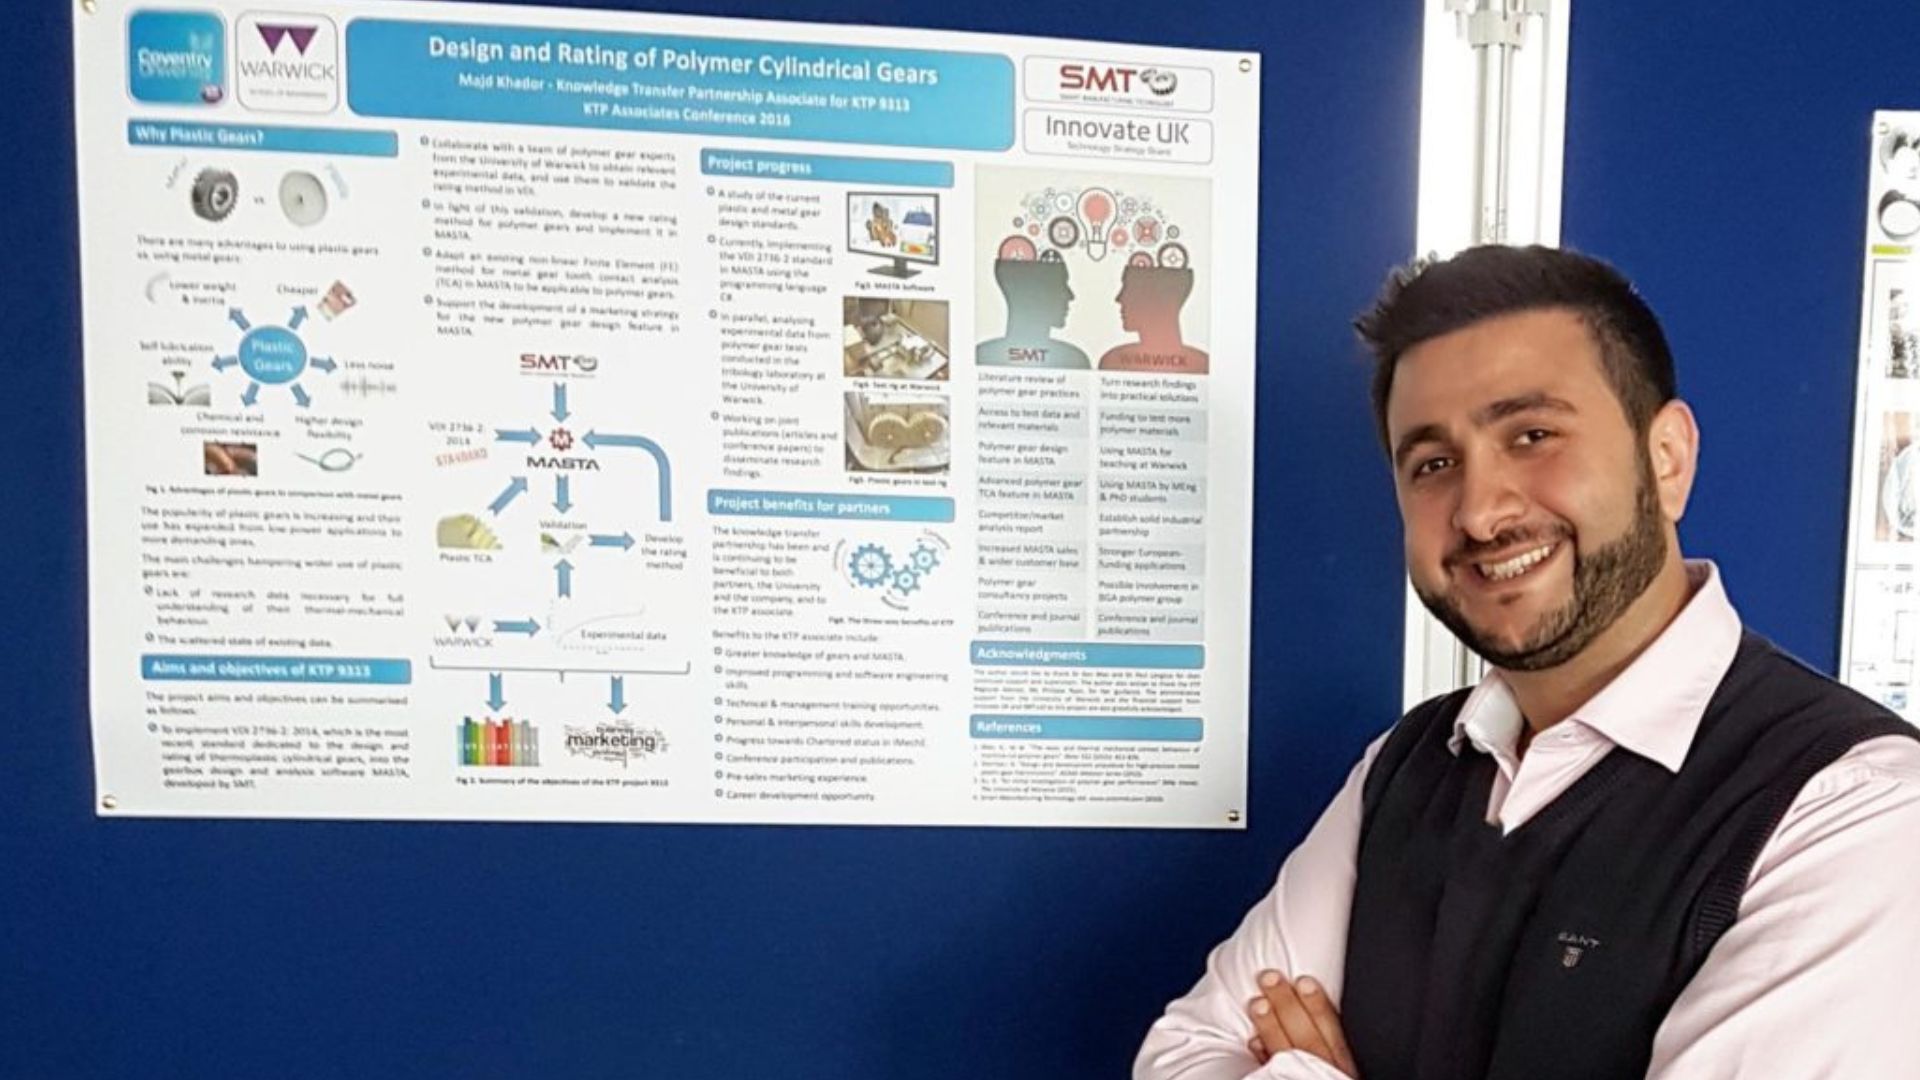 Majd Khador, SMT’s KTP Associate presents research on the “Design and Rating of Polymer Cylindrical Gears” at the KTP Associates Conference 2016 in Coventry University.